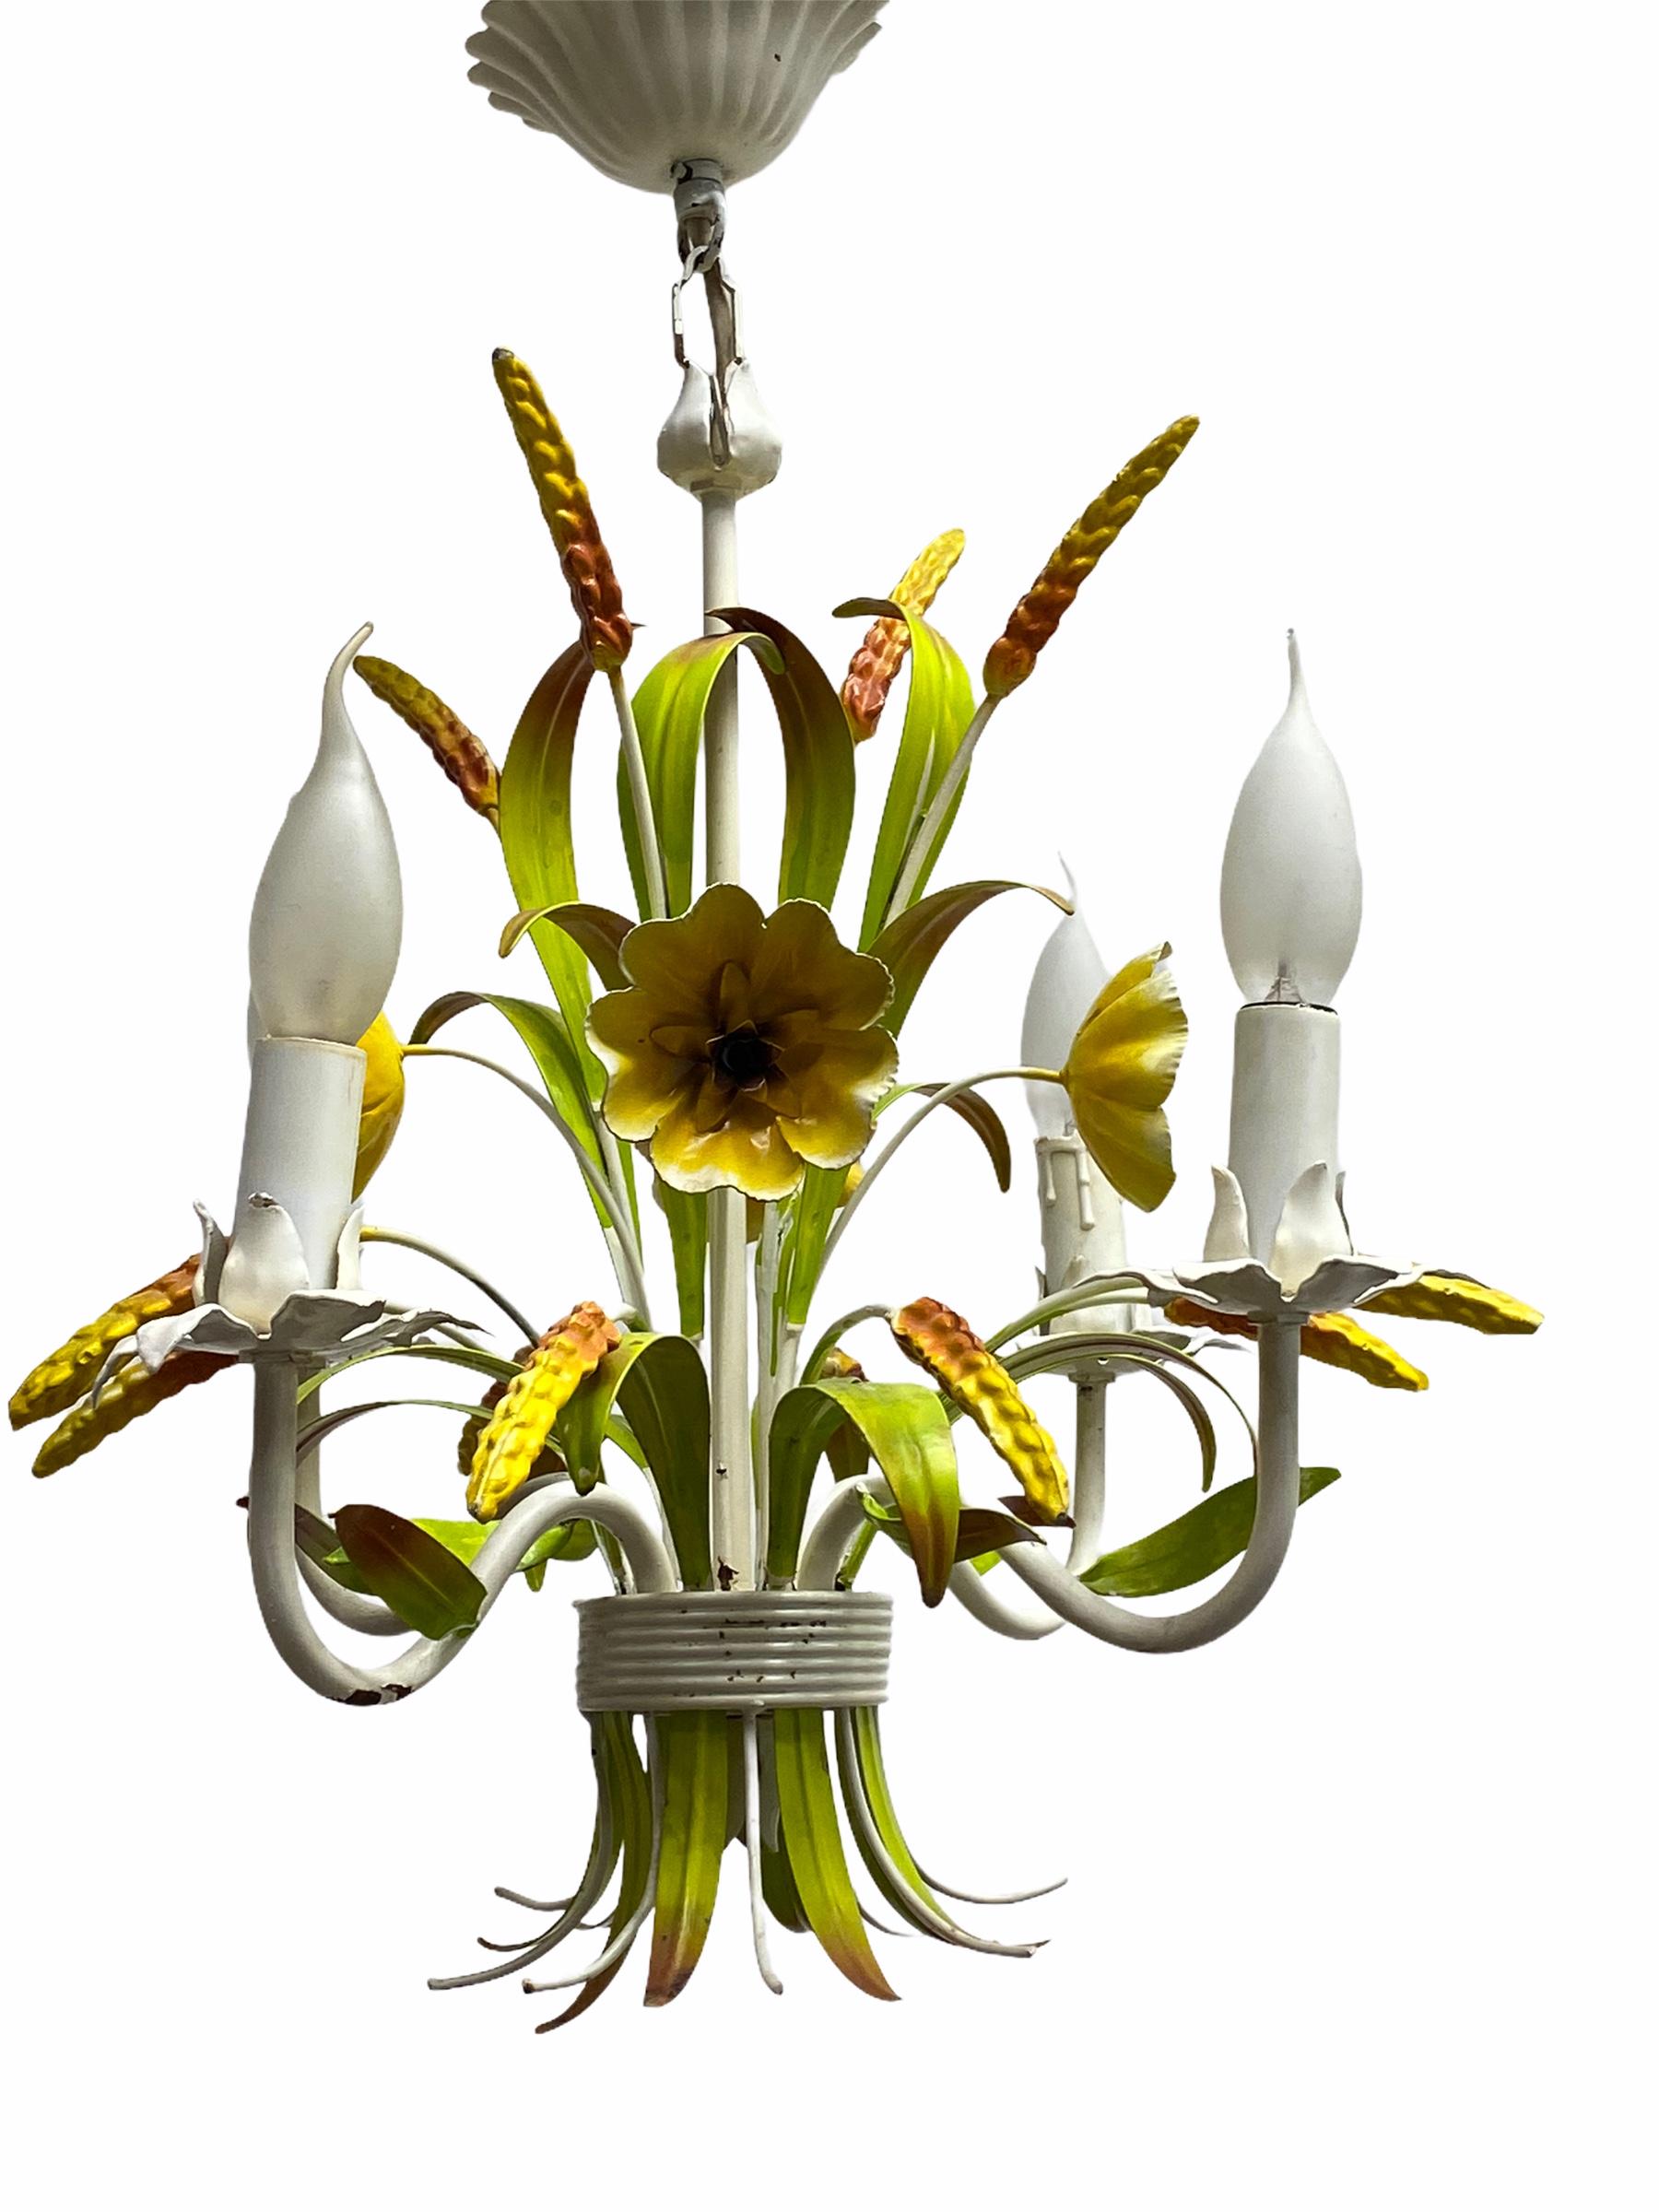 Petite Florentine style four-light chandelier. Functions as is with four E14 / 110 volt light bulbs. Can take up to 40 watts each bulb. Beautiful colored metal chandelier.
It gives the room a beautiful warm light and shows the French country or